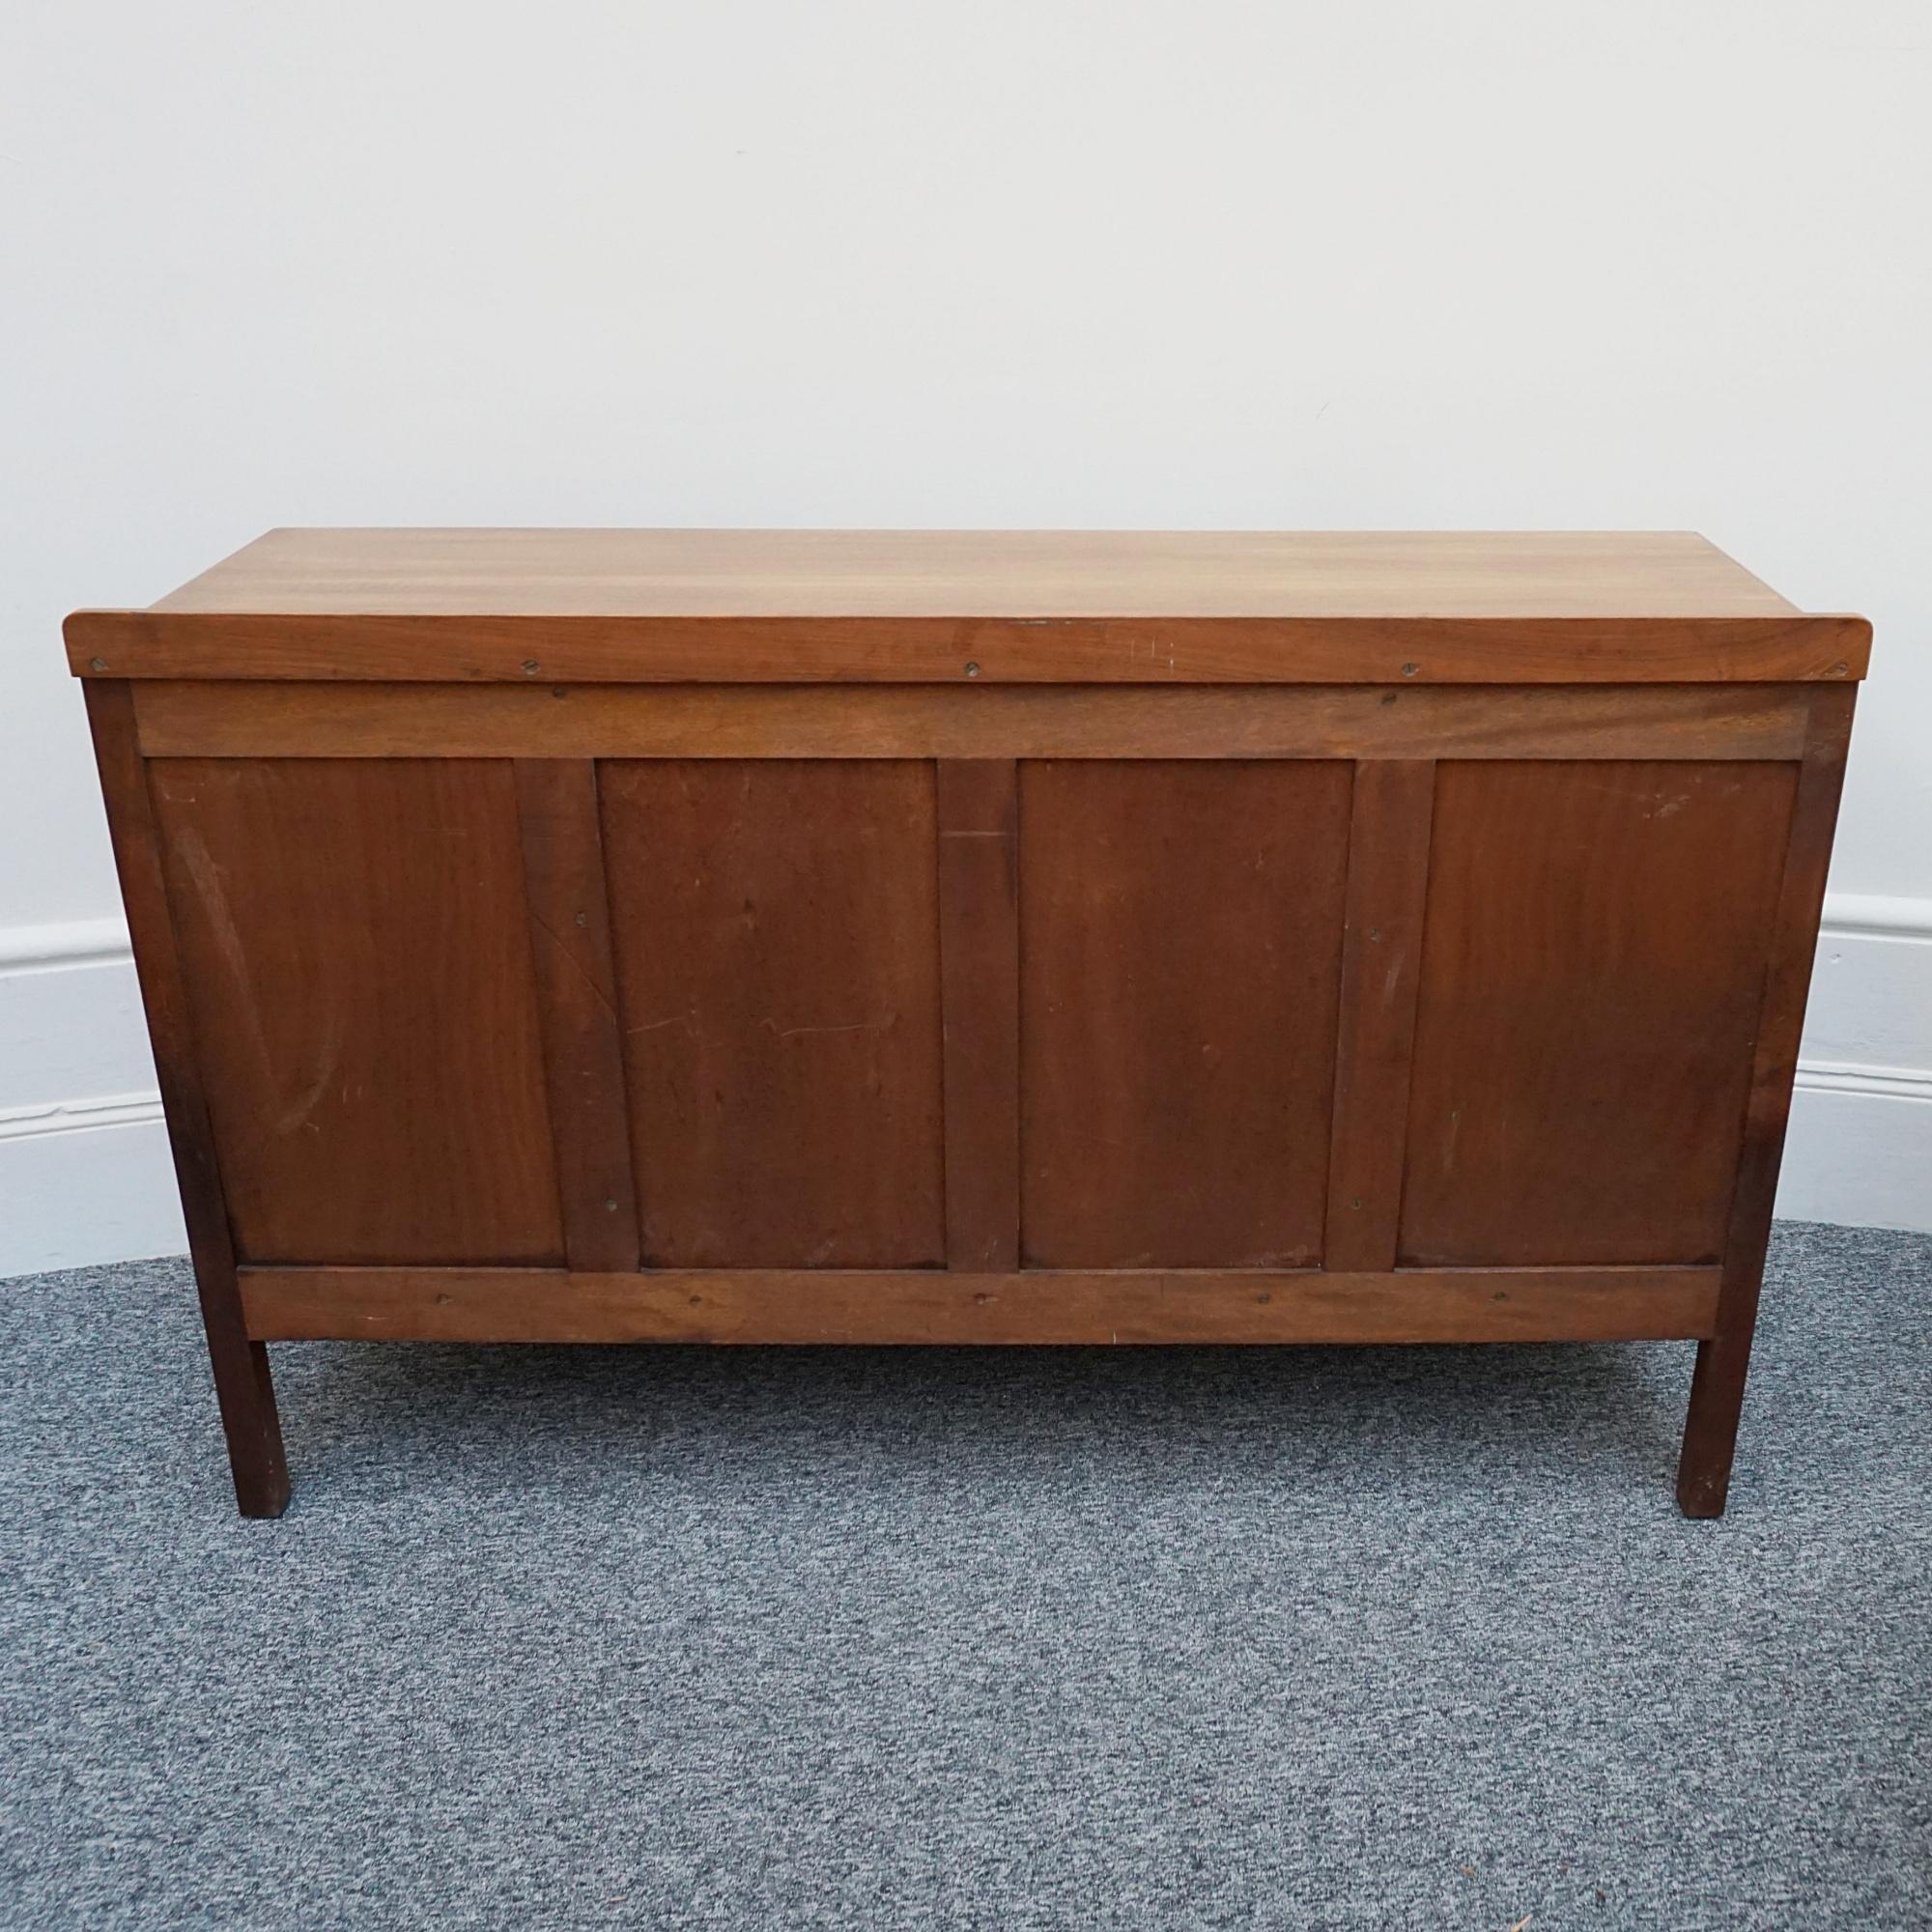 Vintage Art Deco Sideboard by Heal's of London Burr and Figured Walnut For Sale 6